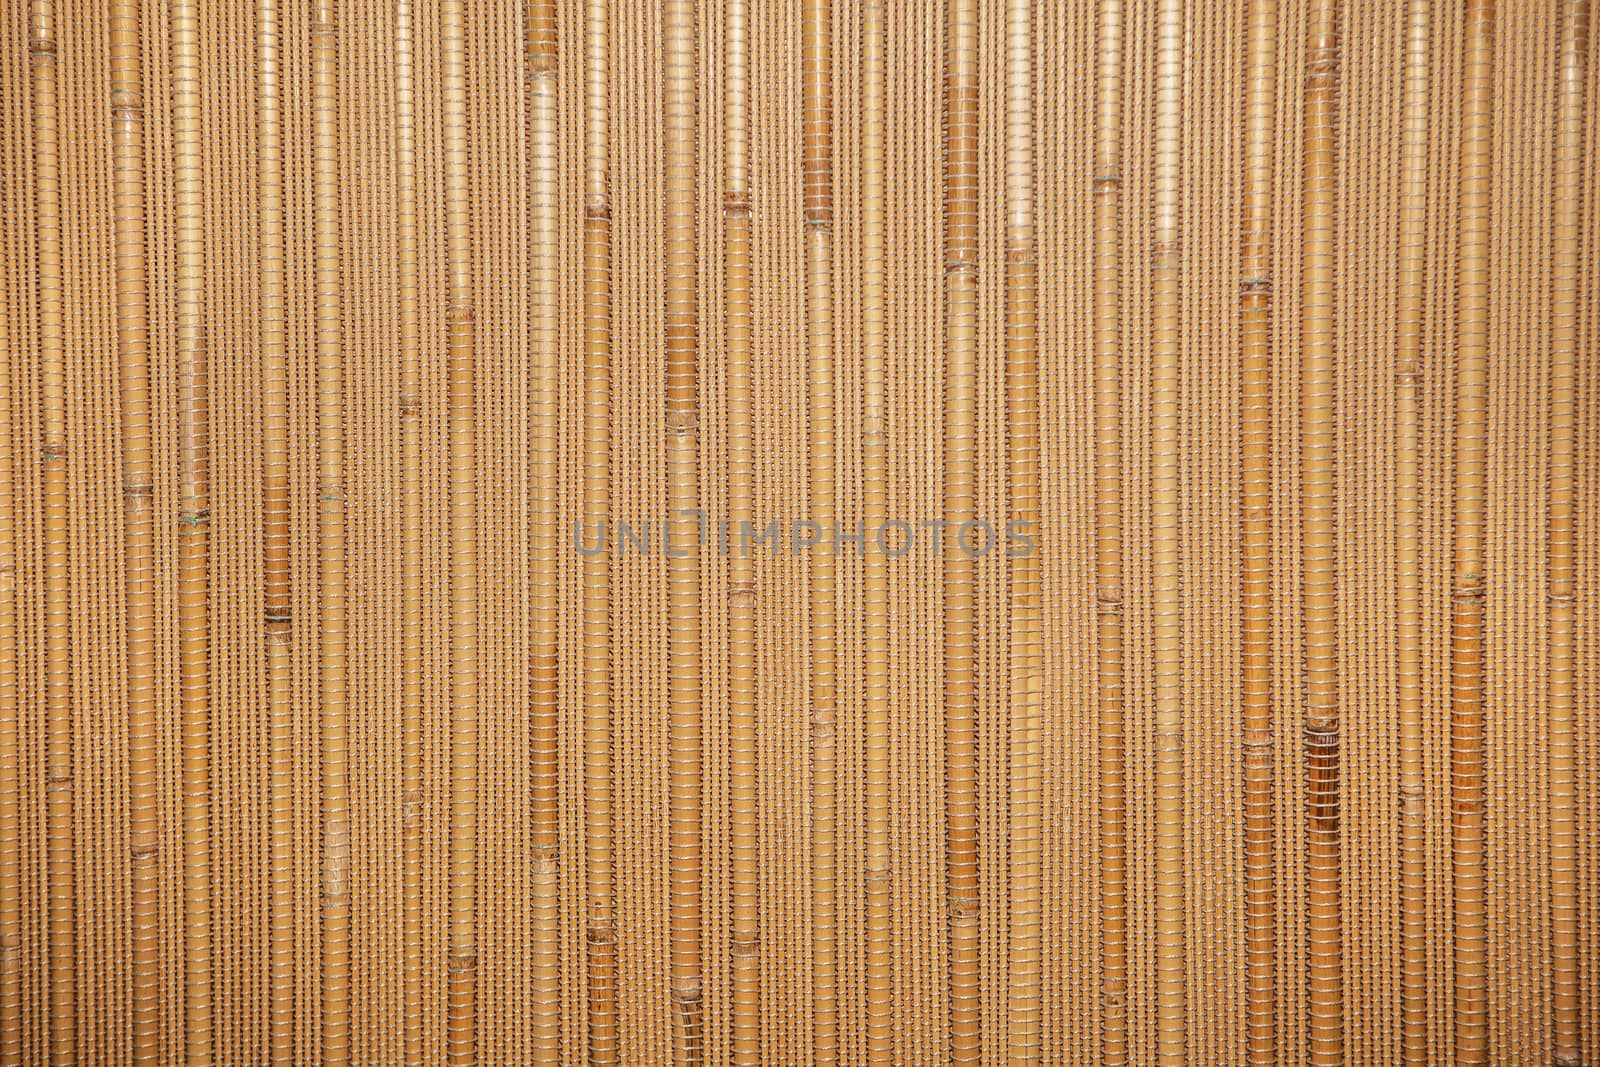 Natural warm wooden background with bamboo and straw by natazhekova